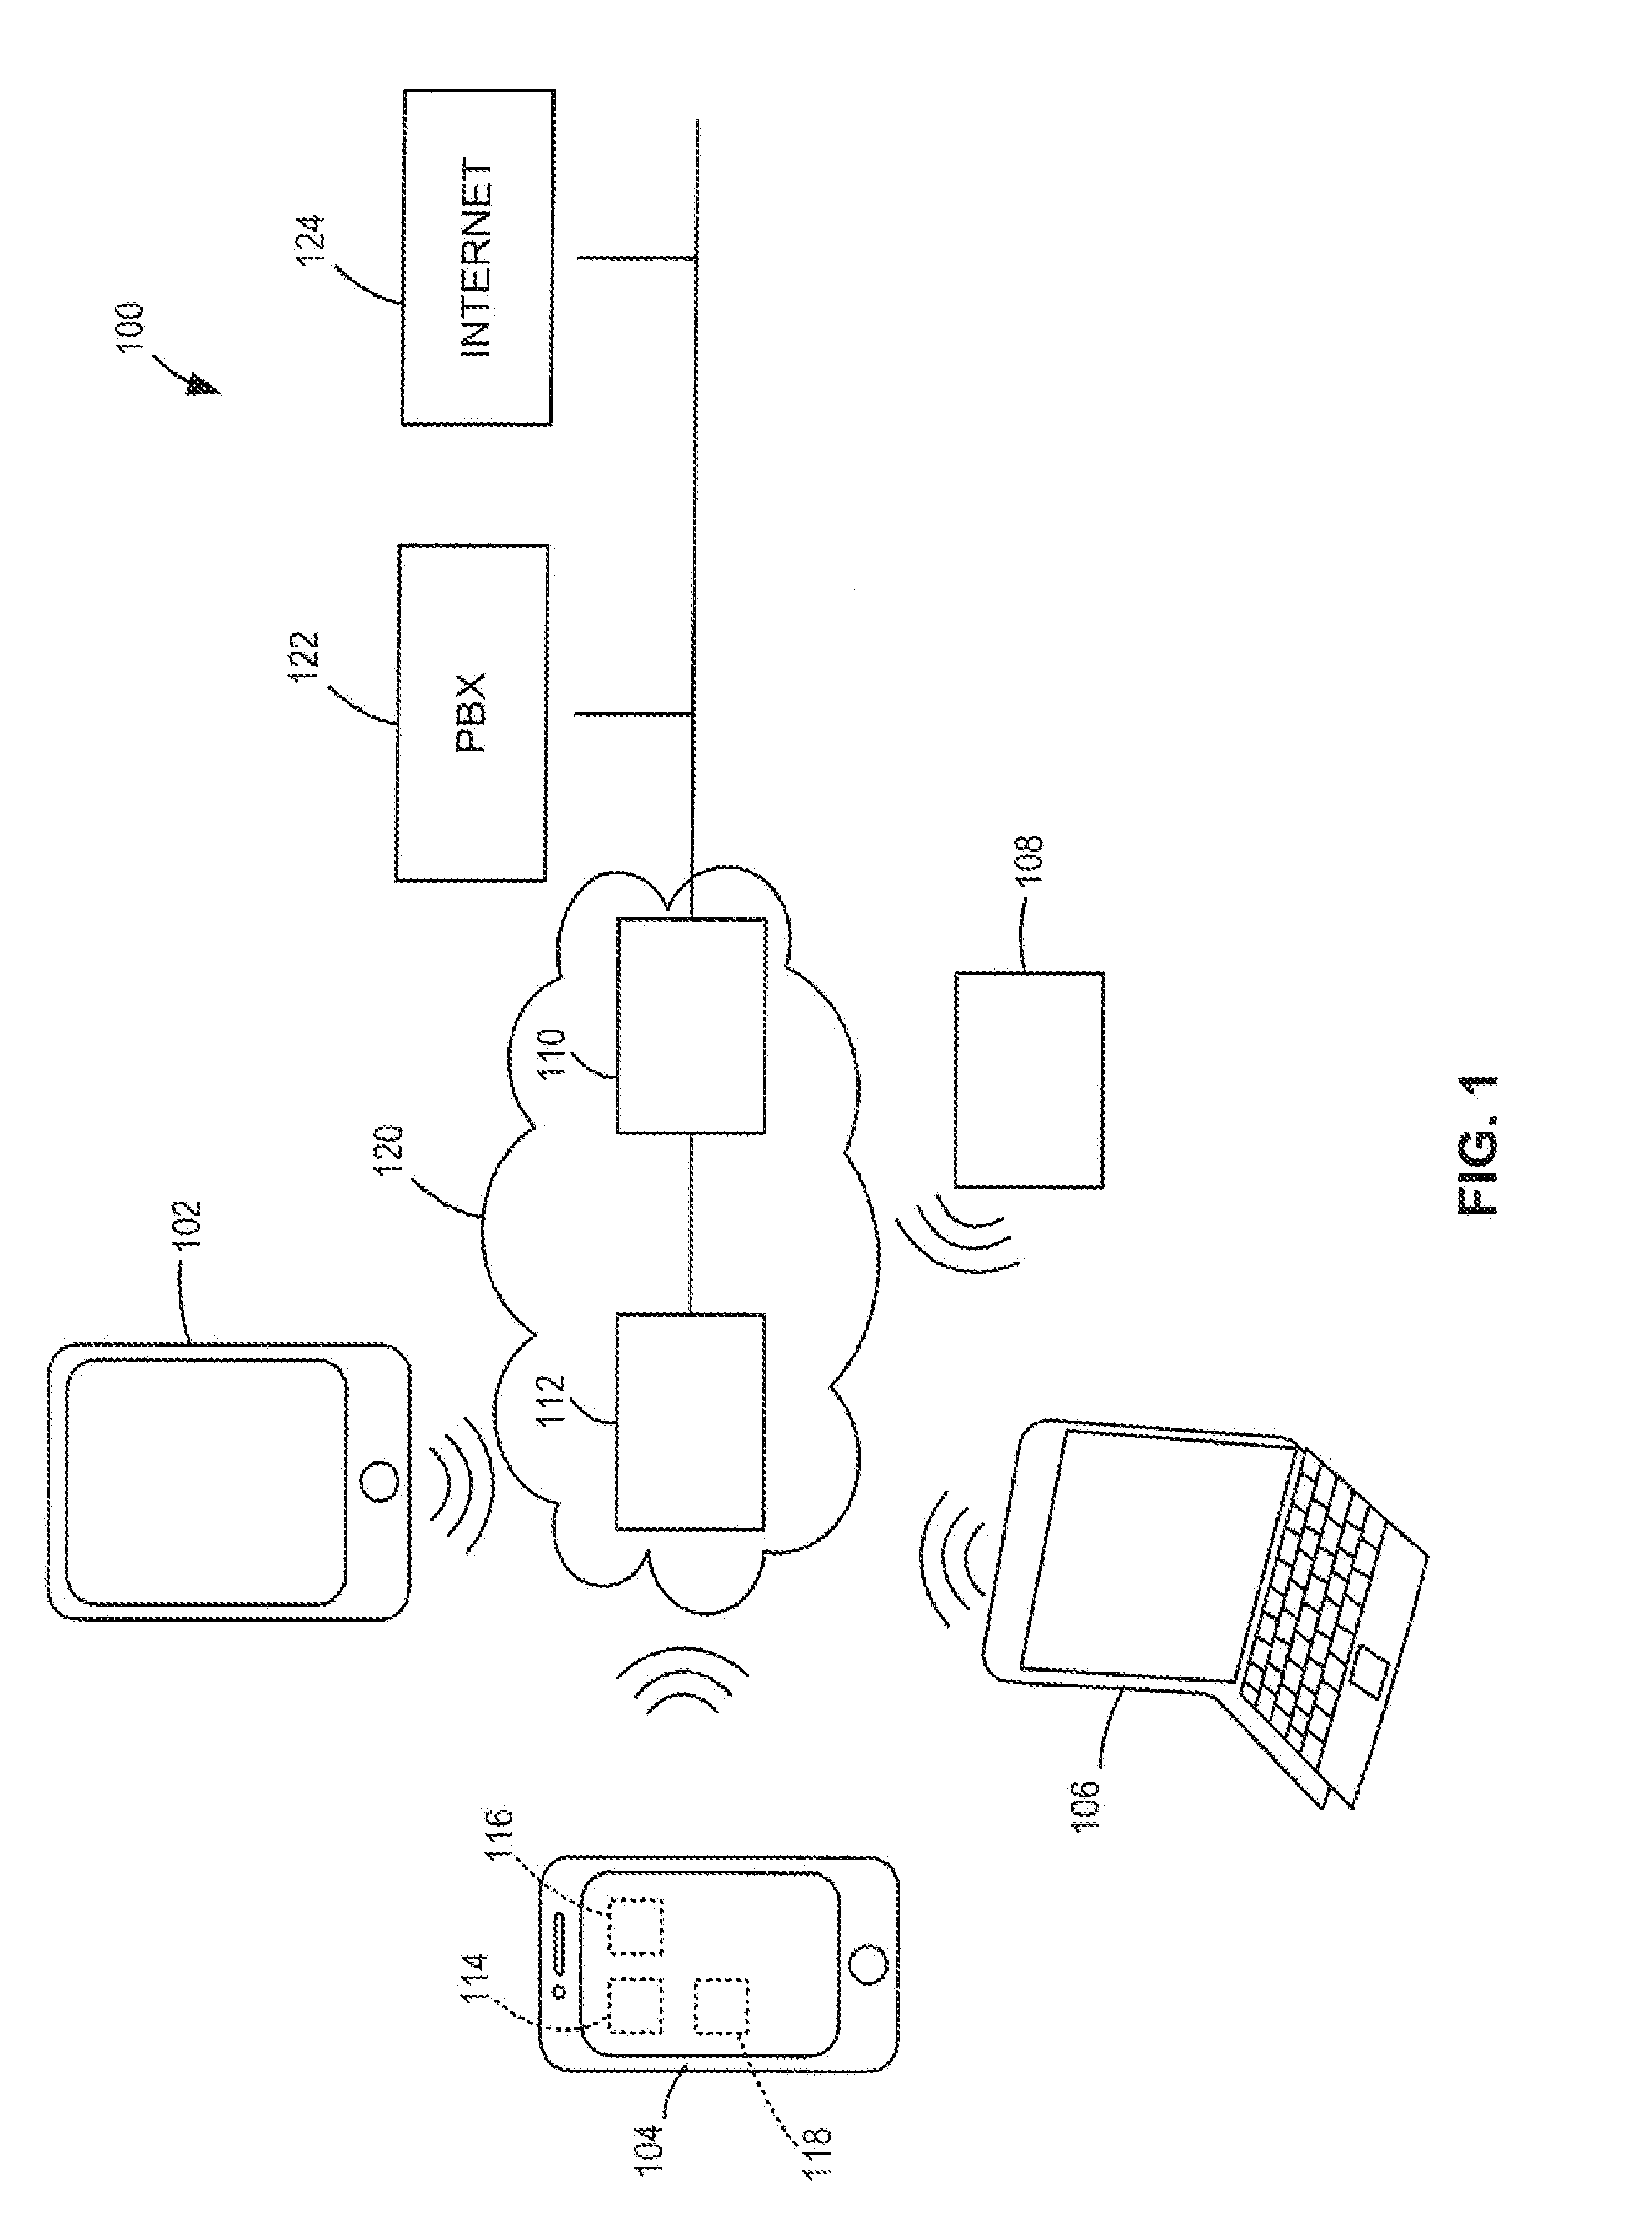 Personal Area Network System and Method